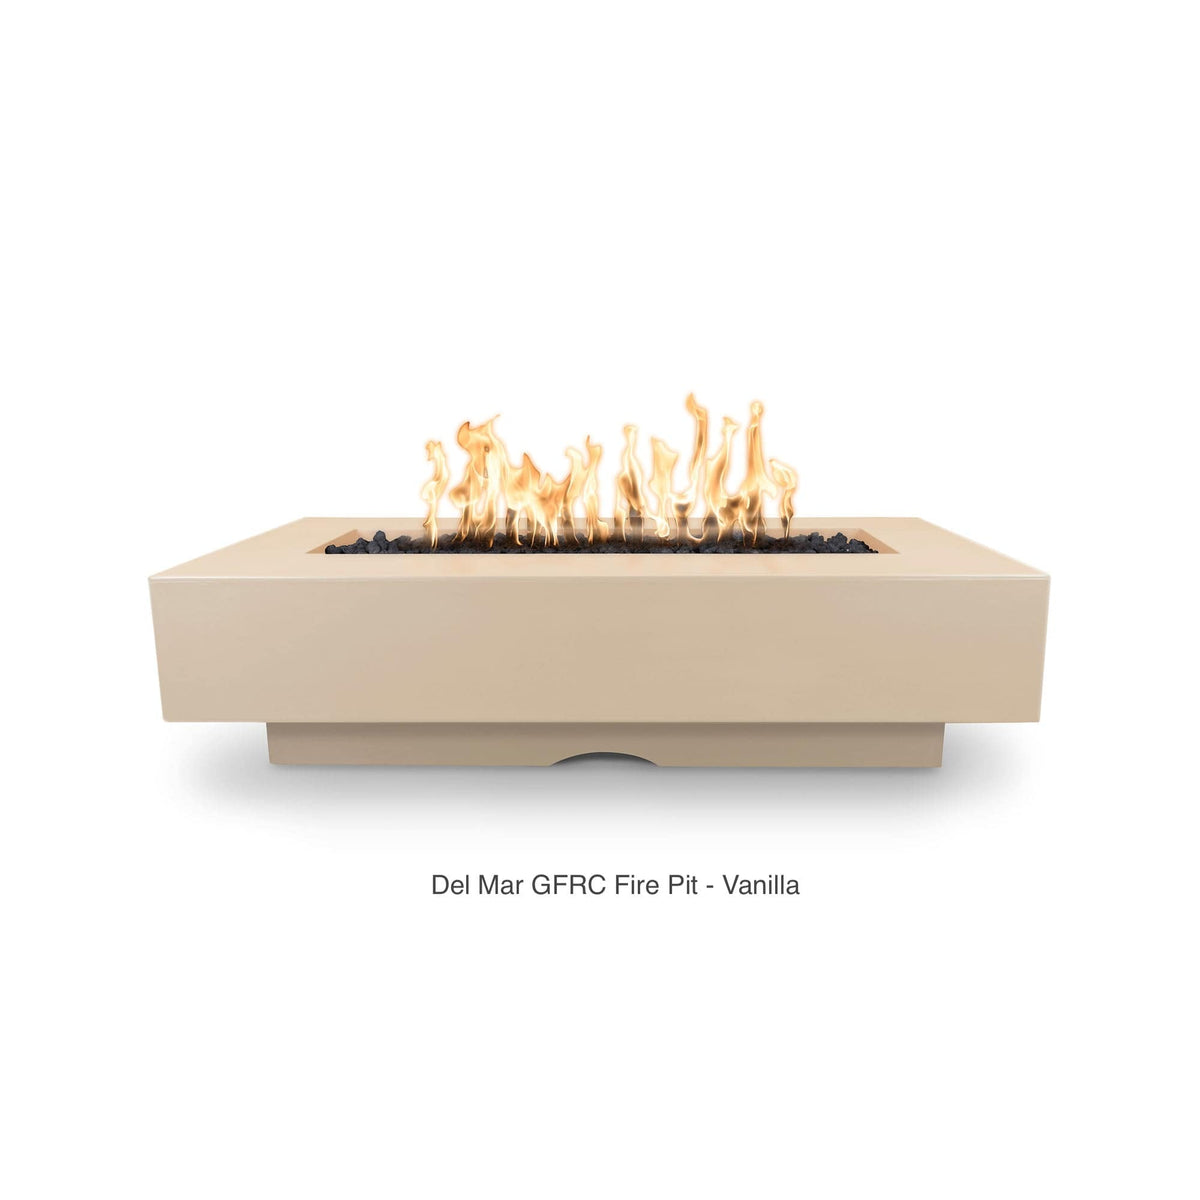 The Outdoor Plus Fire Features The Outdoor Plus 48&quot;, 60&quot;, 72&quot;, 84&quot;, 96&quot; Rectangular Del Mar GFRC Concrete Fire Pit / OPT-CORGFRC48, OPT-DEL6028, OPT-DEL7228, OPT-DEL8428, OPT-DEL9628